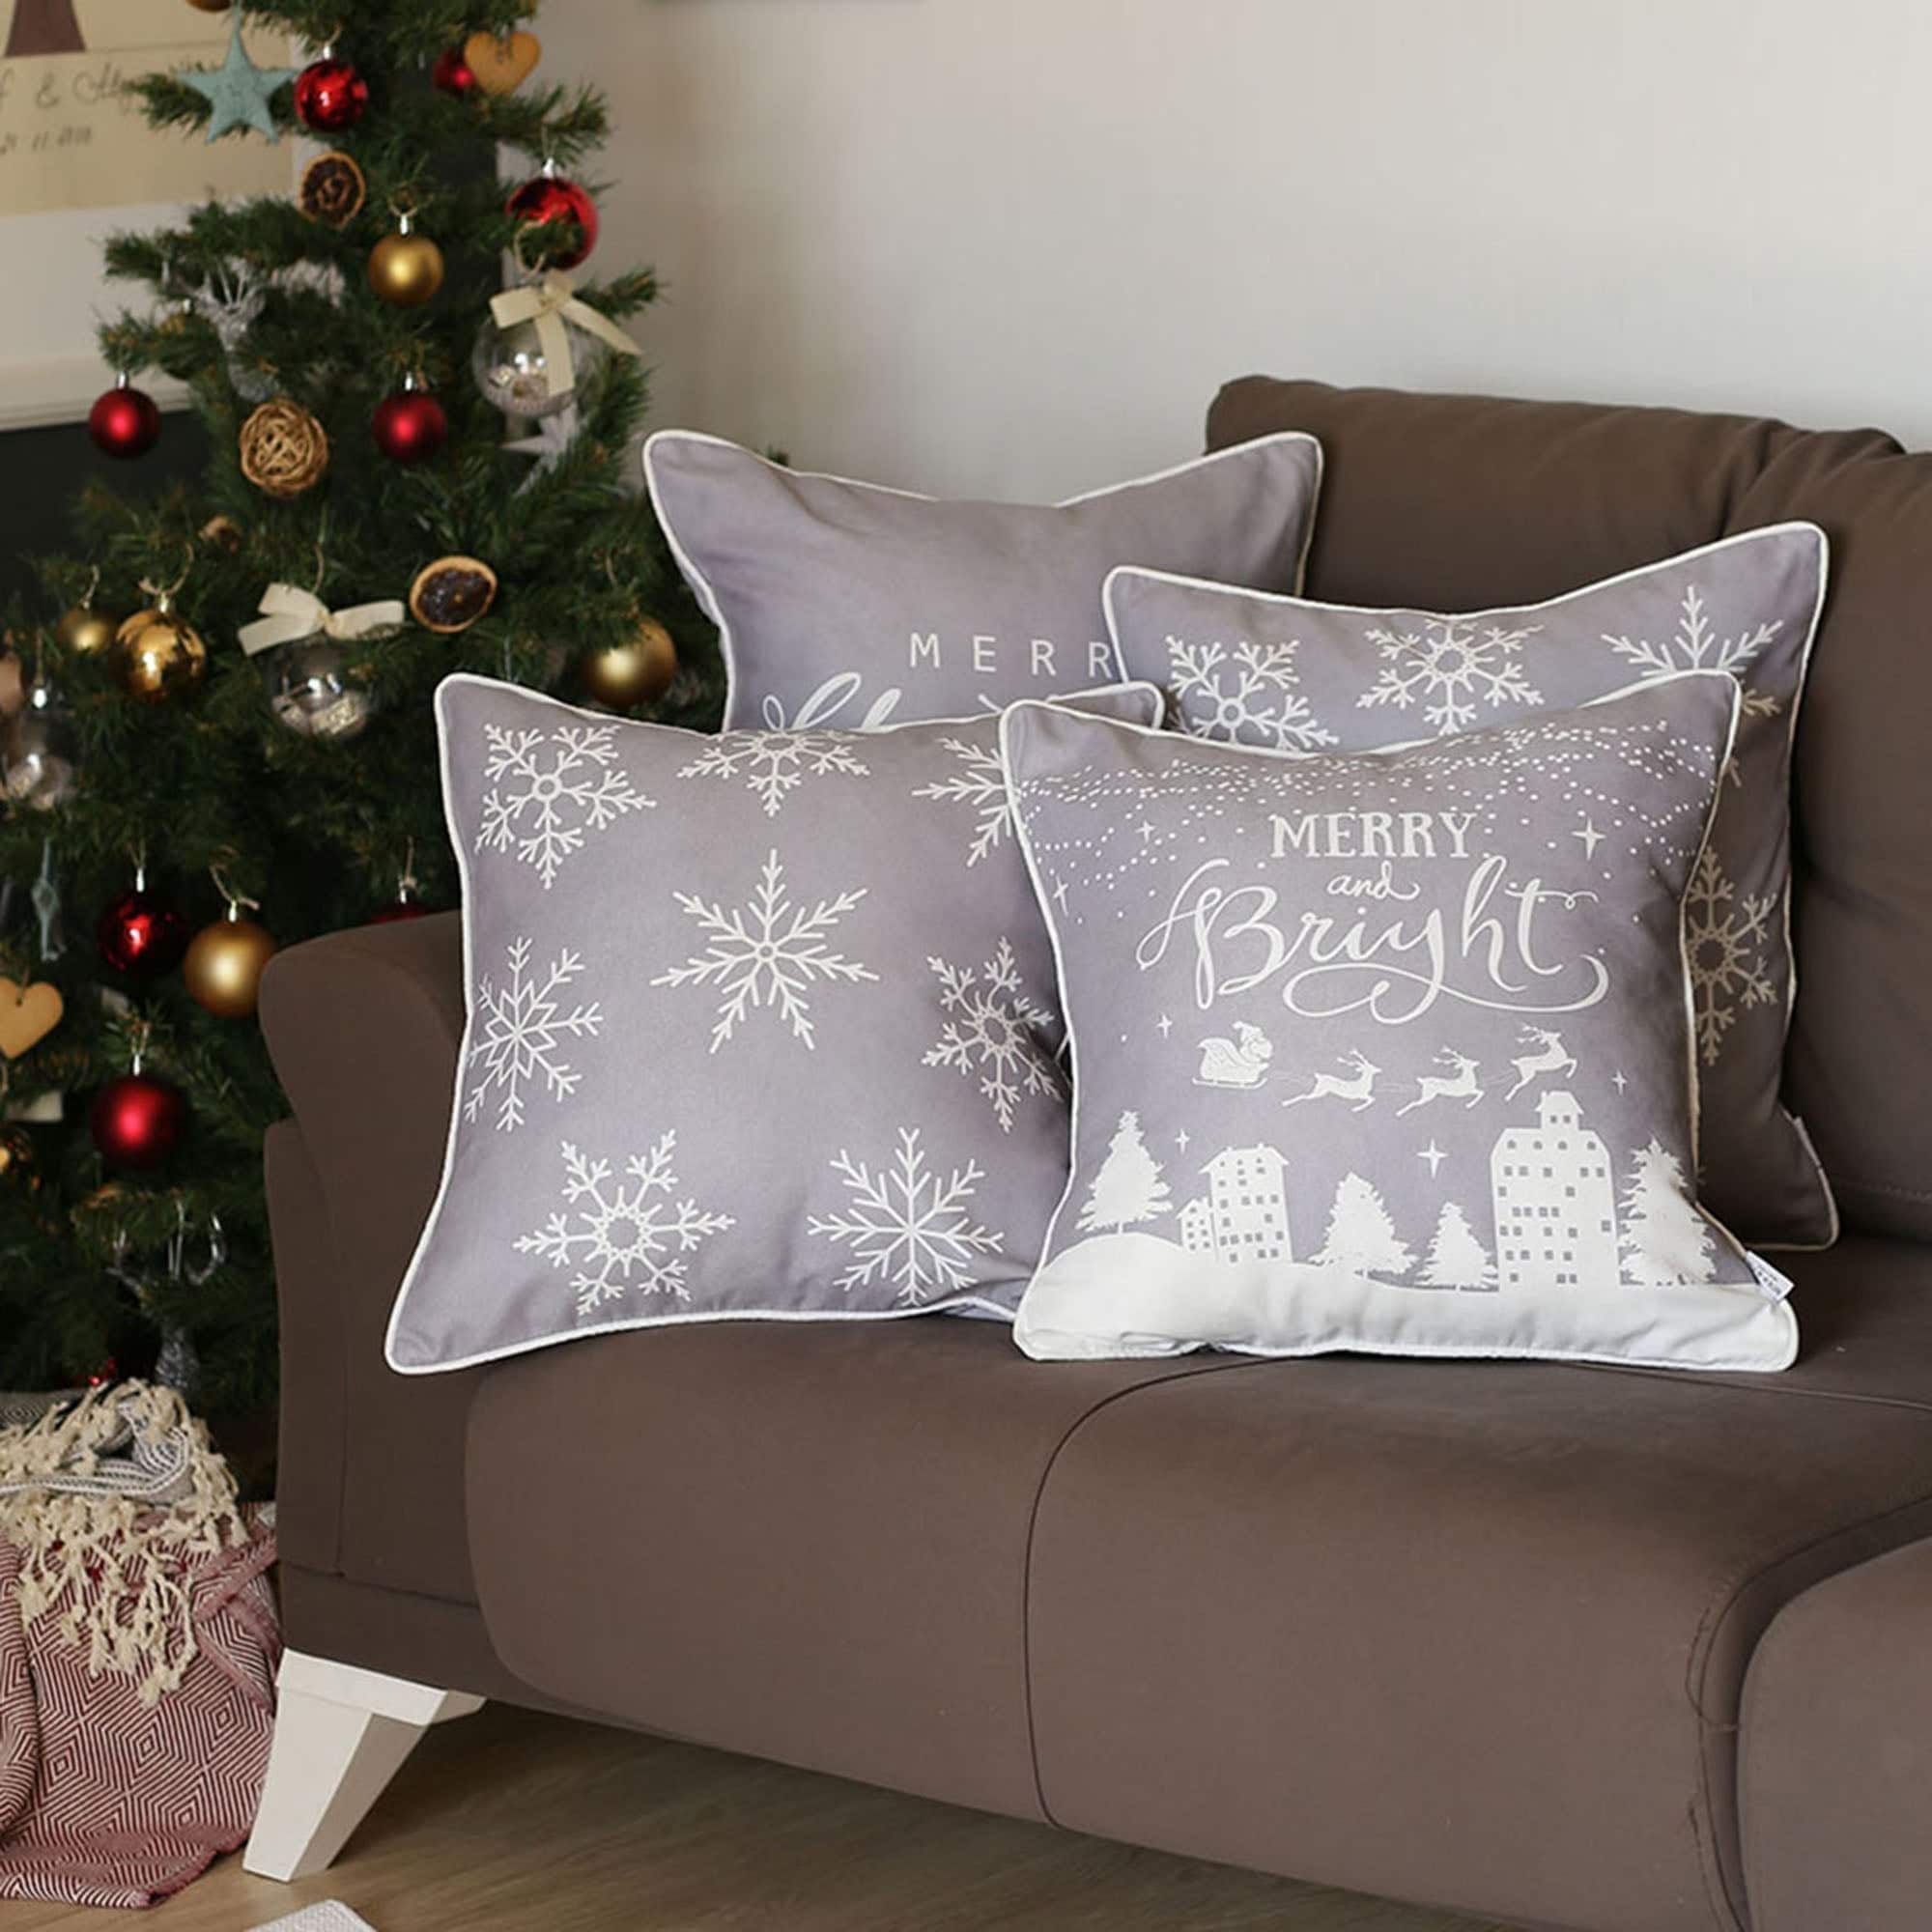 https://ak1.ostkcdn.com/images/products/is/images/direct/7c260ef715799611997168db39054ea367e9c05a/Decorative-Christmas-Snowflakes-Single-Throw-Pillow-Cover-Square.jpg